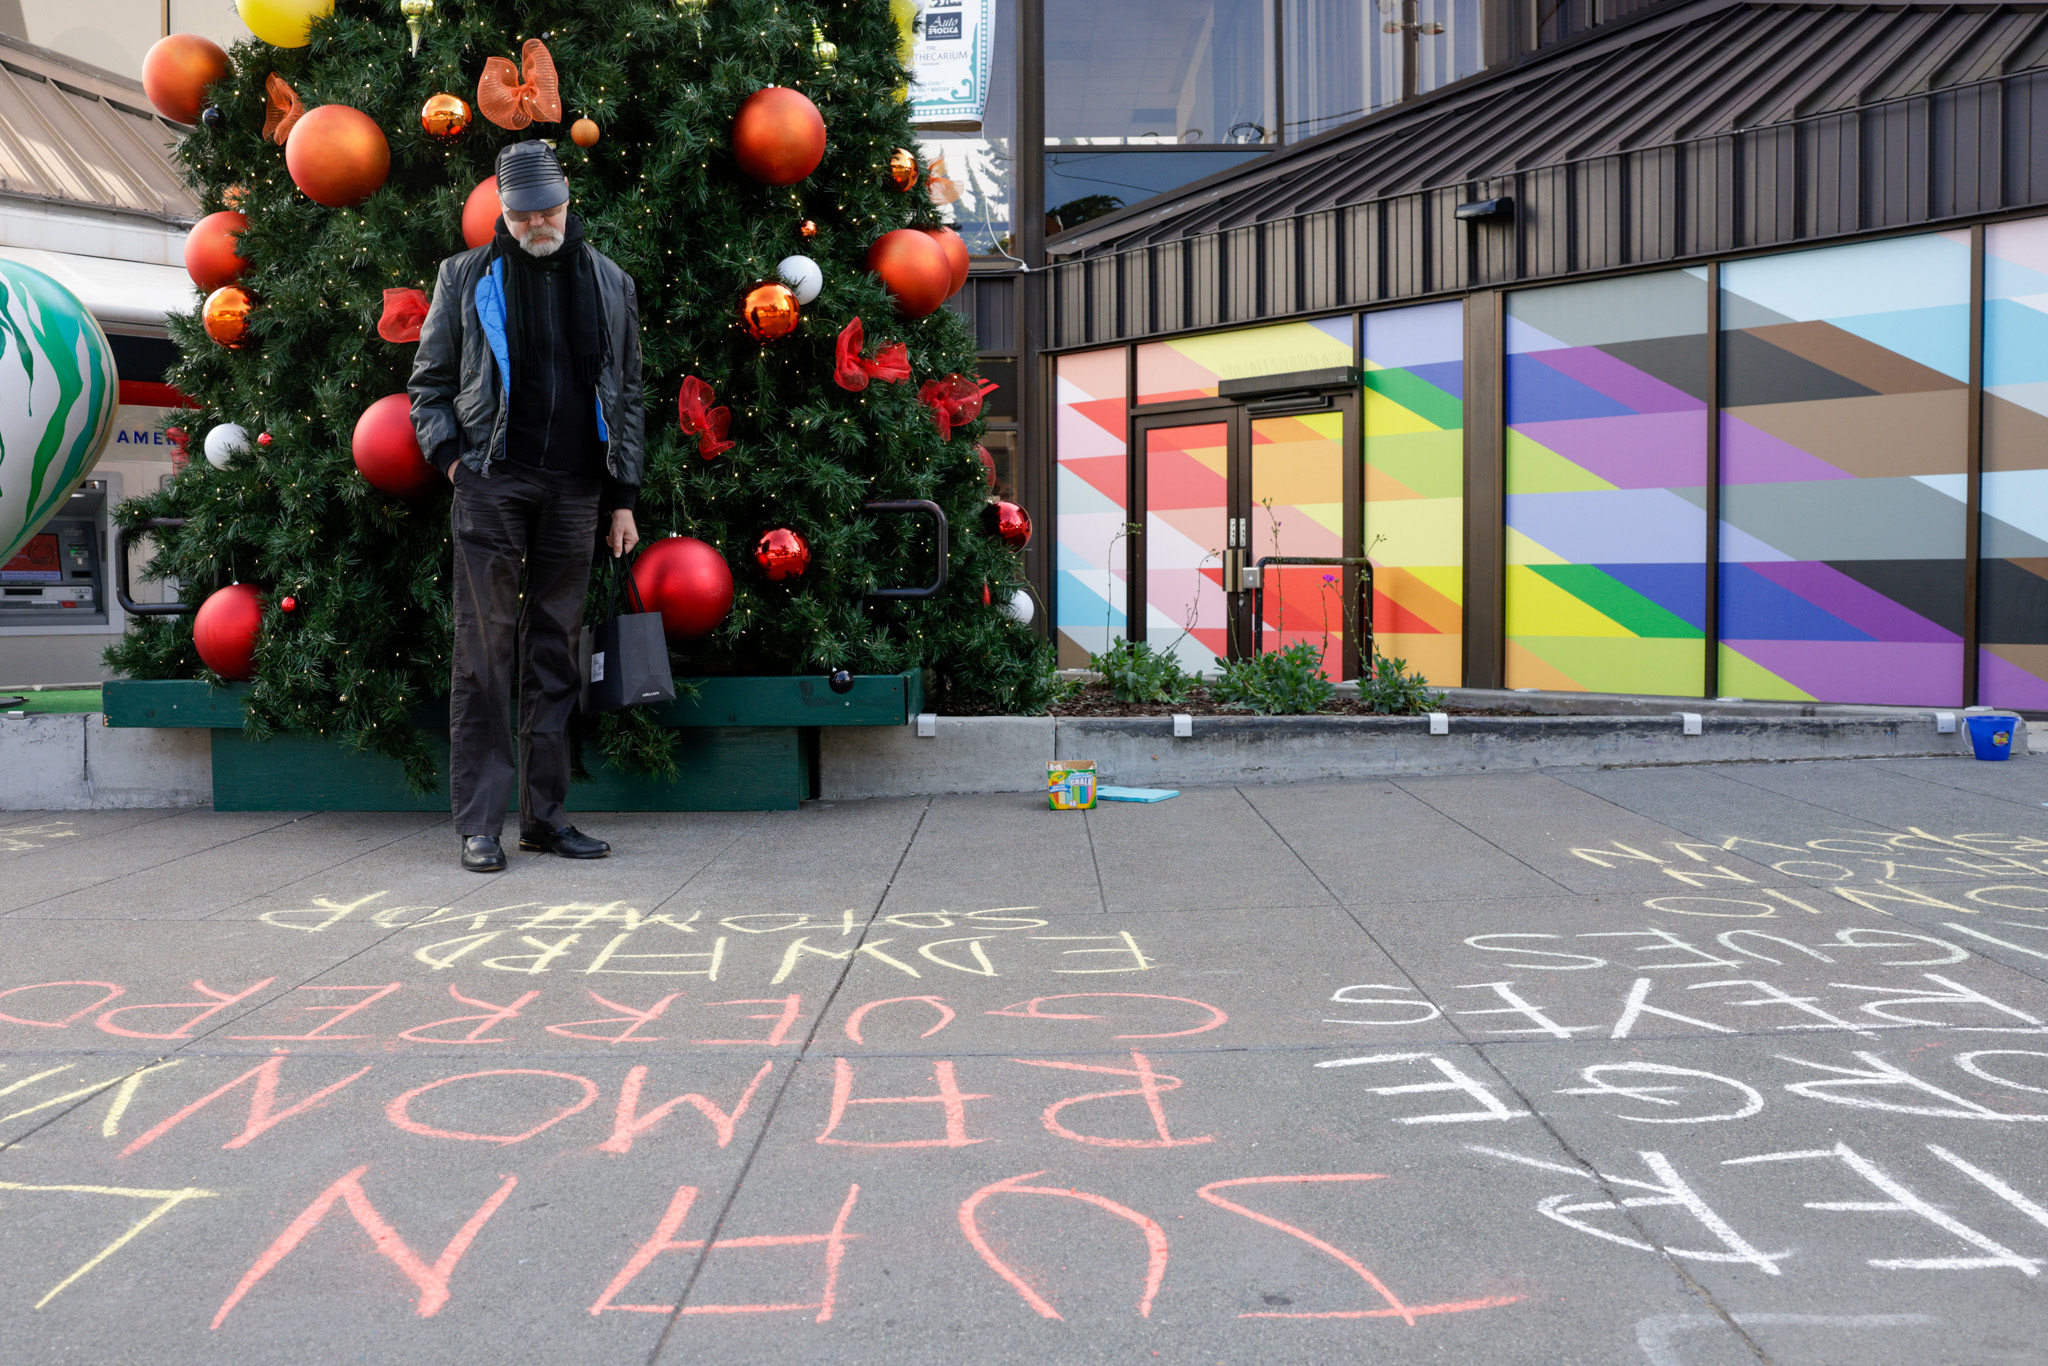 A person in a black hat reads the names of people on the sidewalk written in chalk during World AIDS Day.